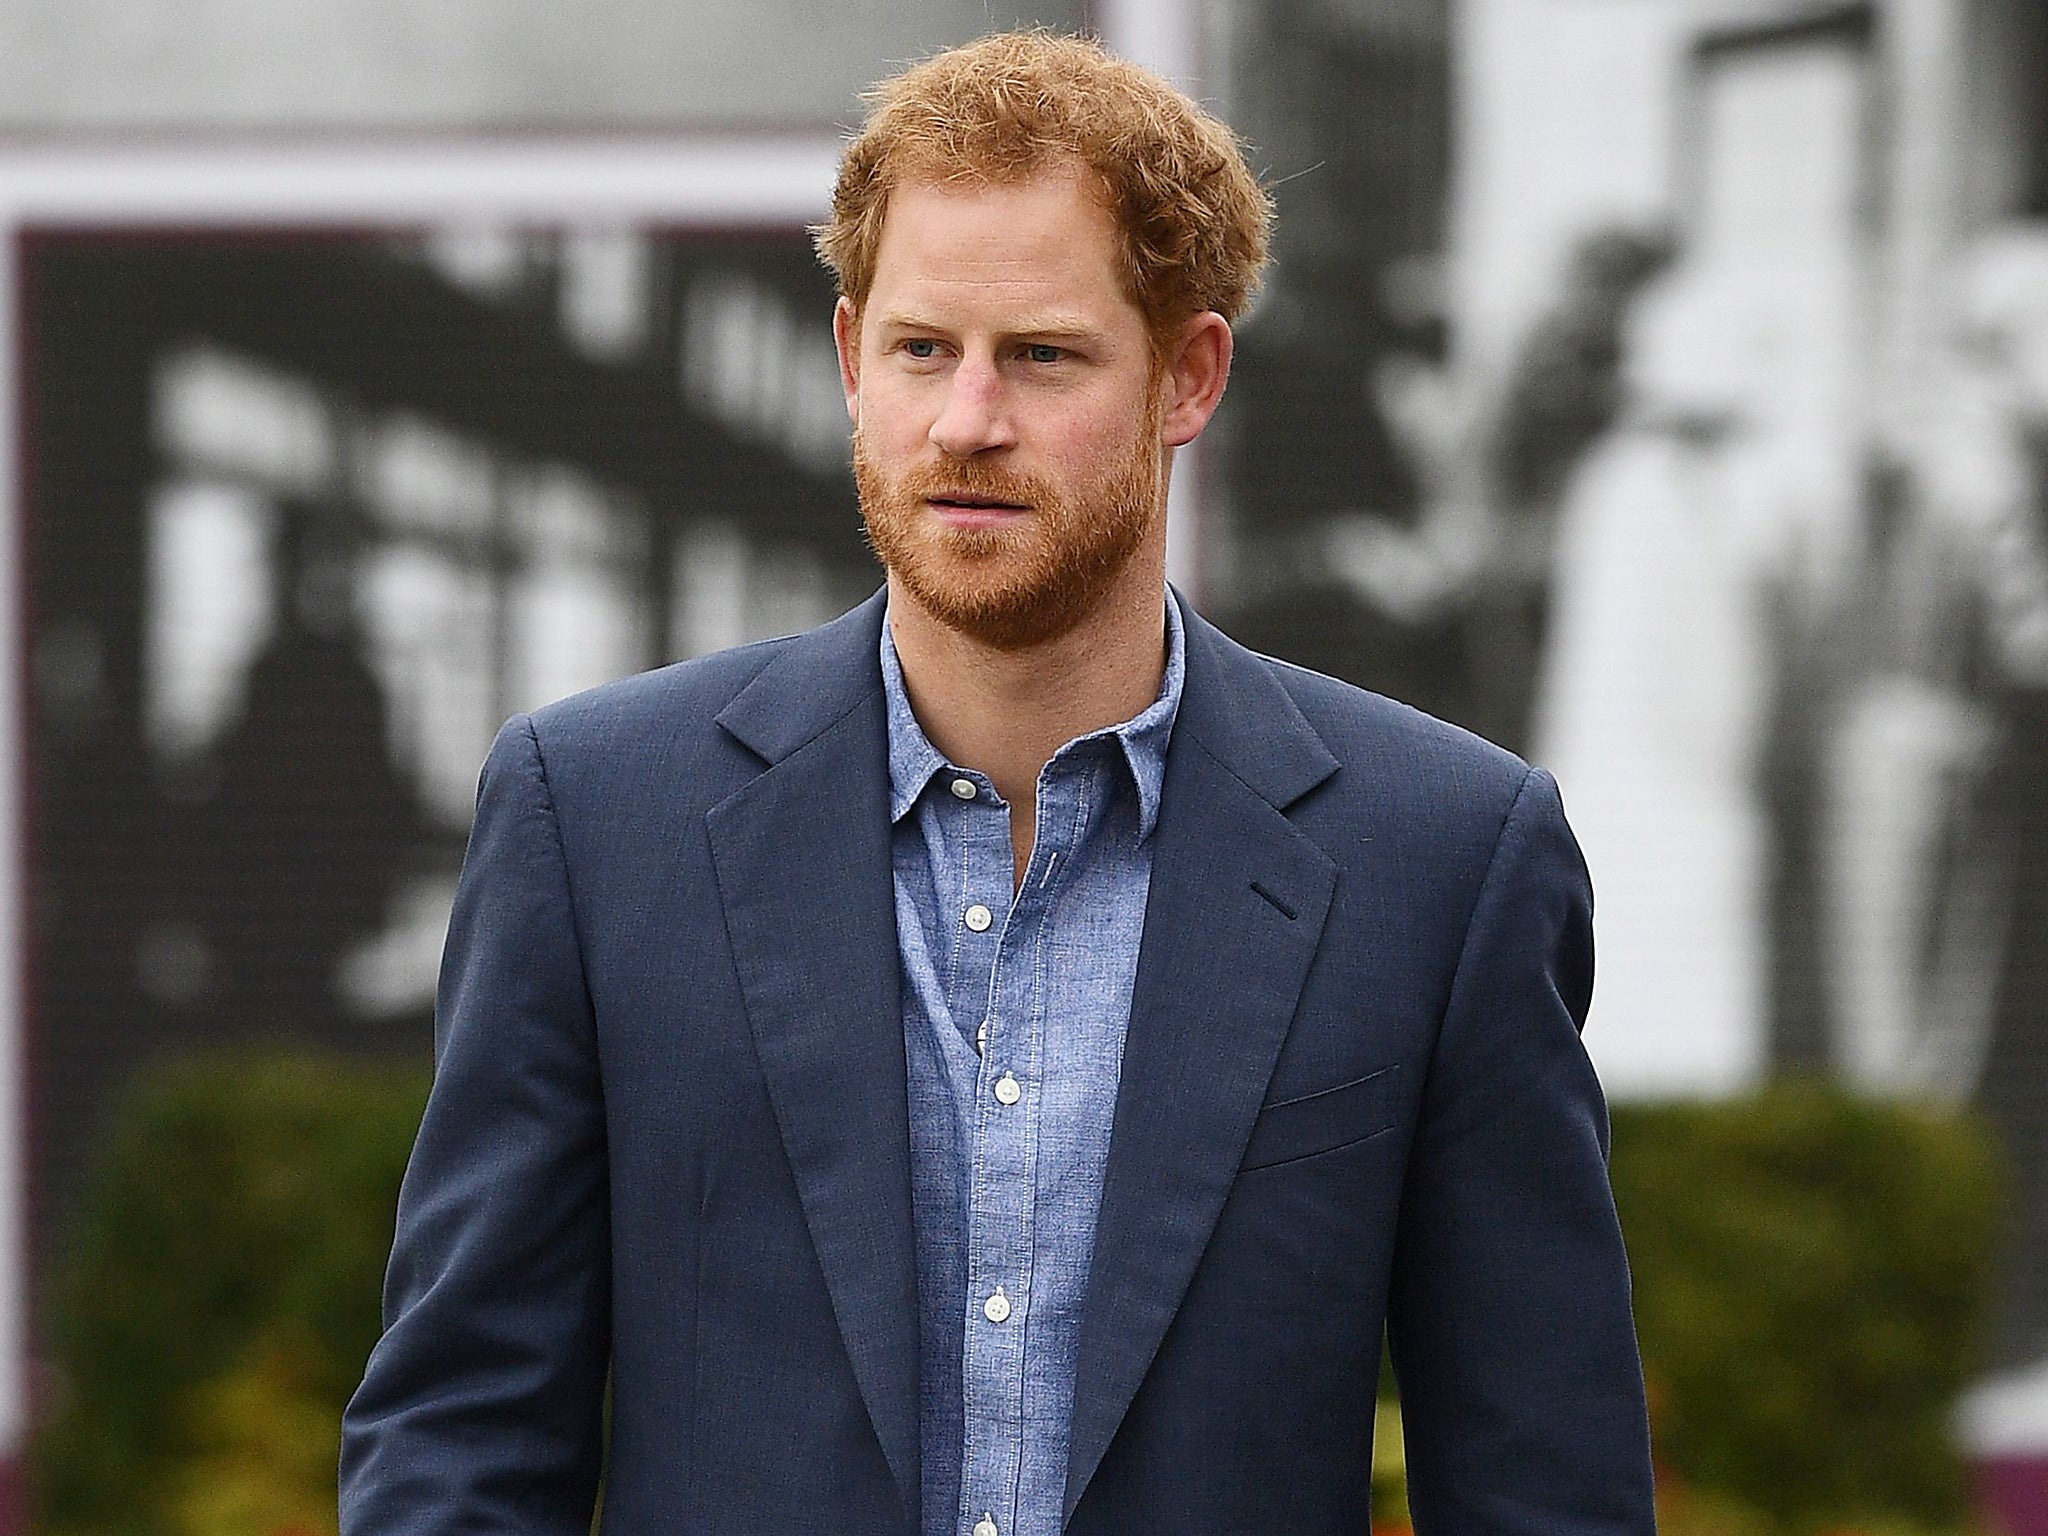 Prince Harry confirmed he was in a relationship with Markle, who is best known for her role in Suits, via an extraordinary statement released by Kensington Palace